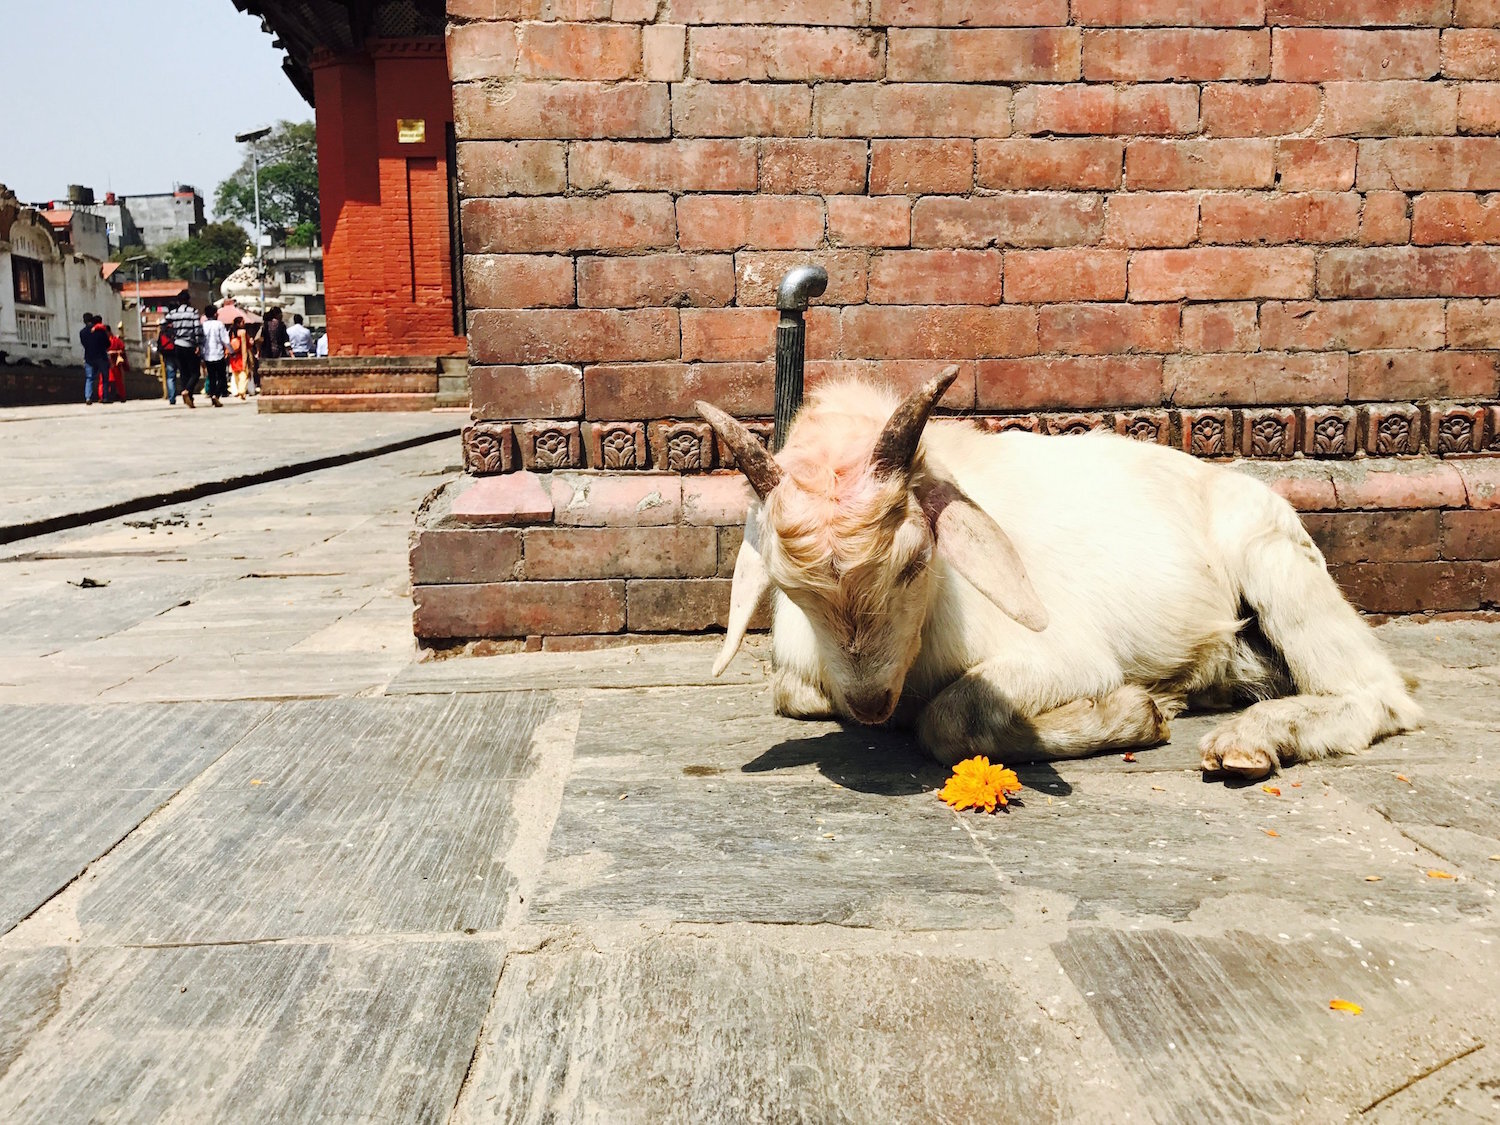 Sweet Goat resting in a village